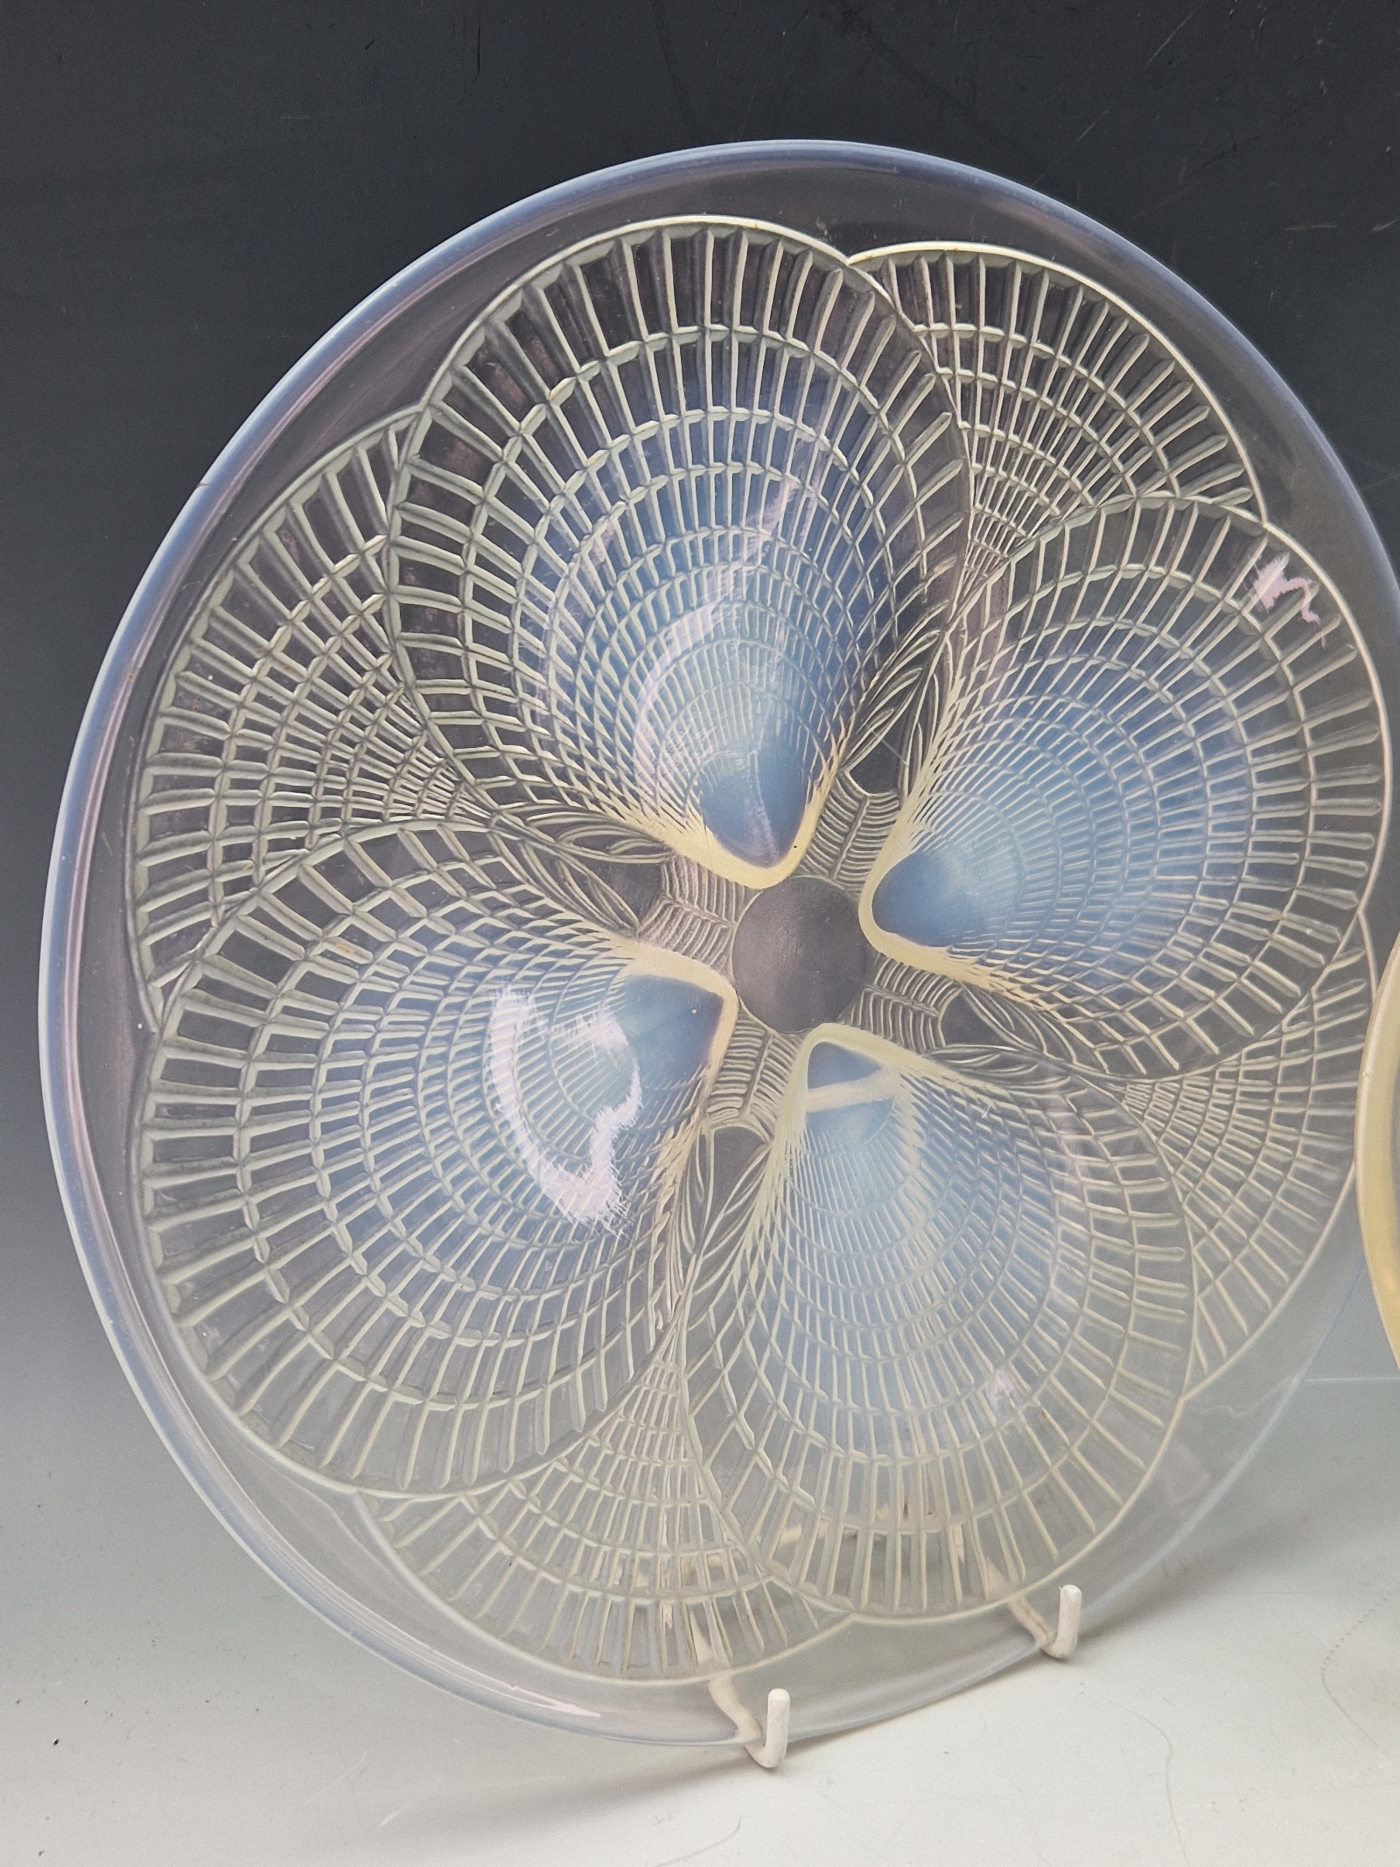 A LALIQUE COQUILLES PATTERN BOWL, ENGRAVED R LALIQUE. Dia. 21cms. TOGETHER WITH A COQUILLES - Image 2 of 5